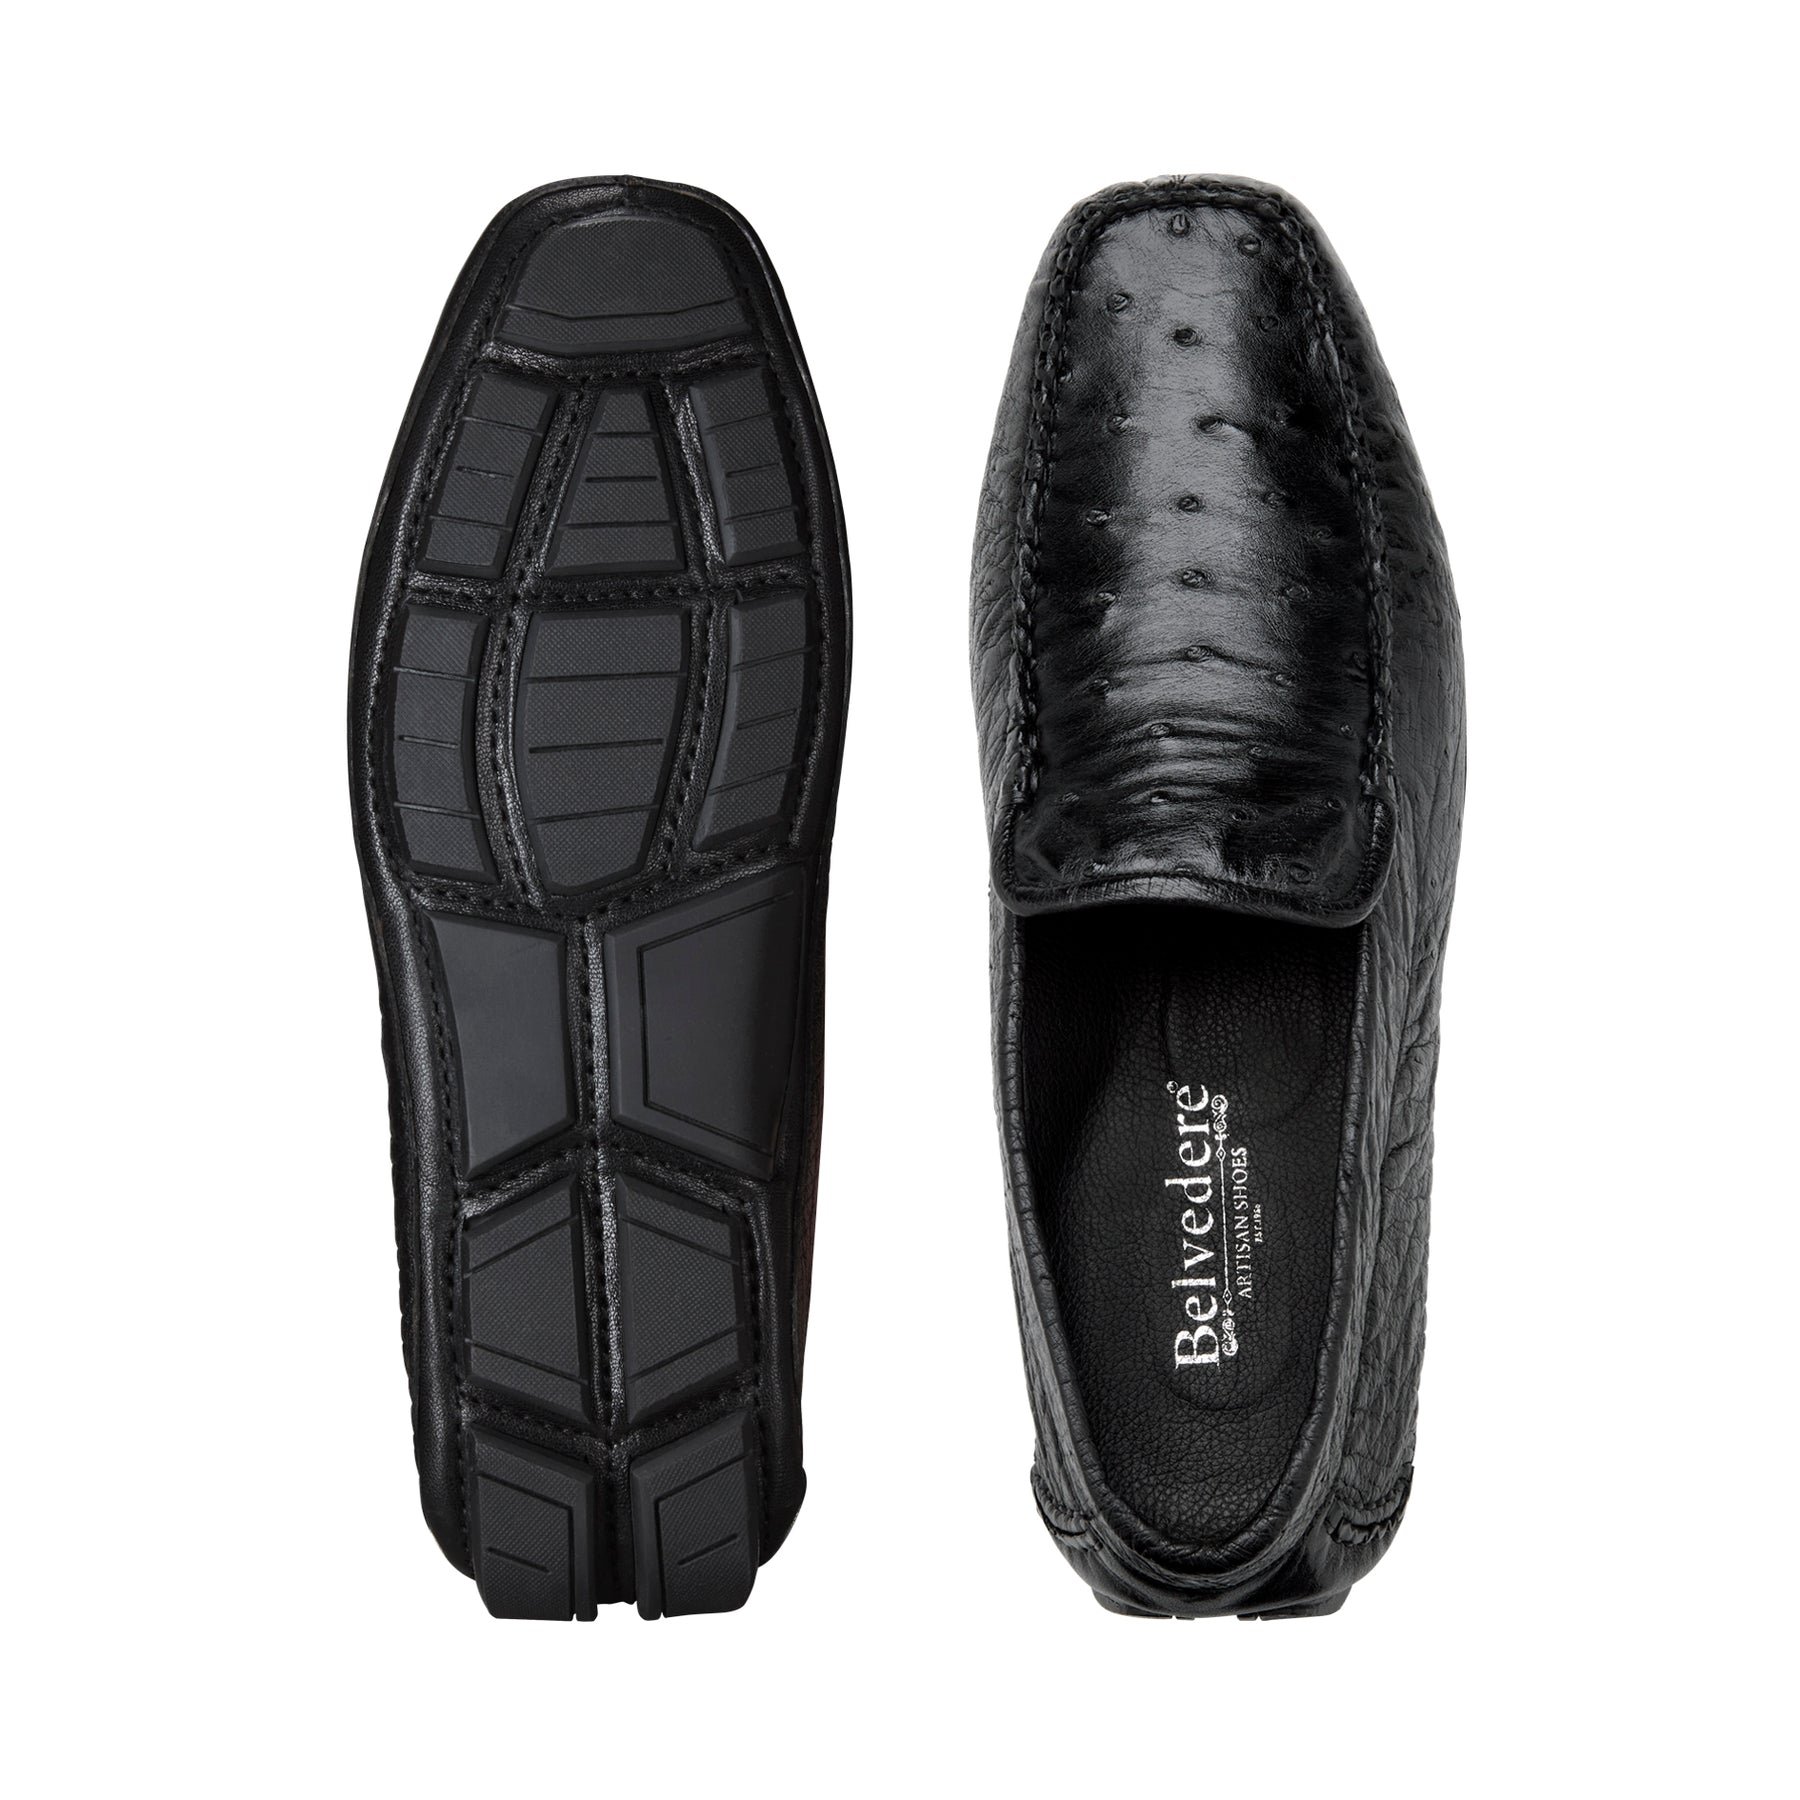 Top and Bottom of Belvedere Black Ostrich Quill Slip On Shoes